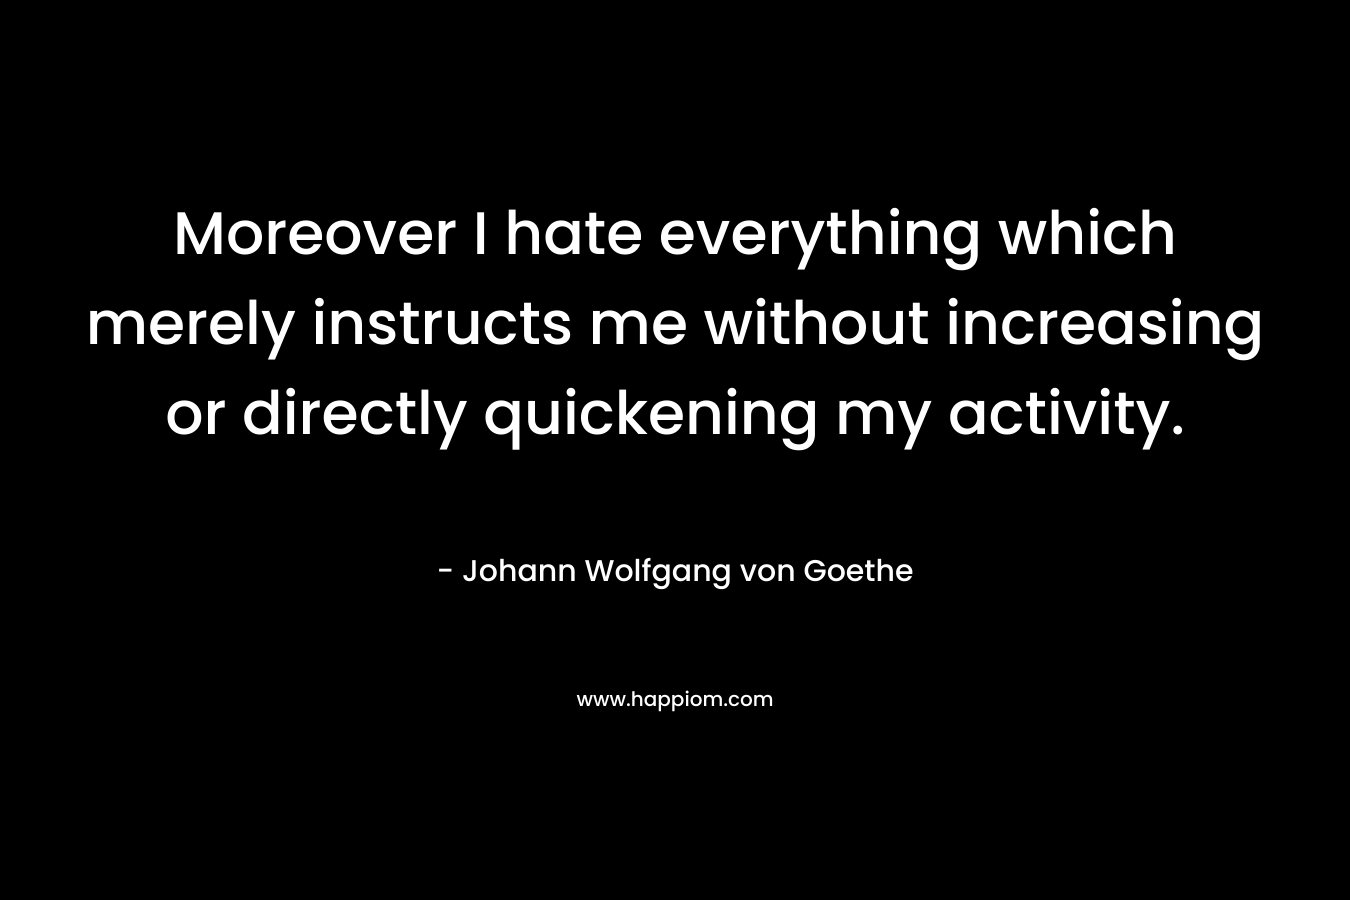 Moreover I hate everything which merely instructs me without increasing or directly quickening my activity. – Johann Wolfgang von Goethe